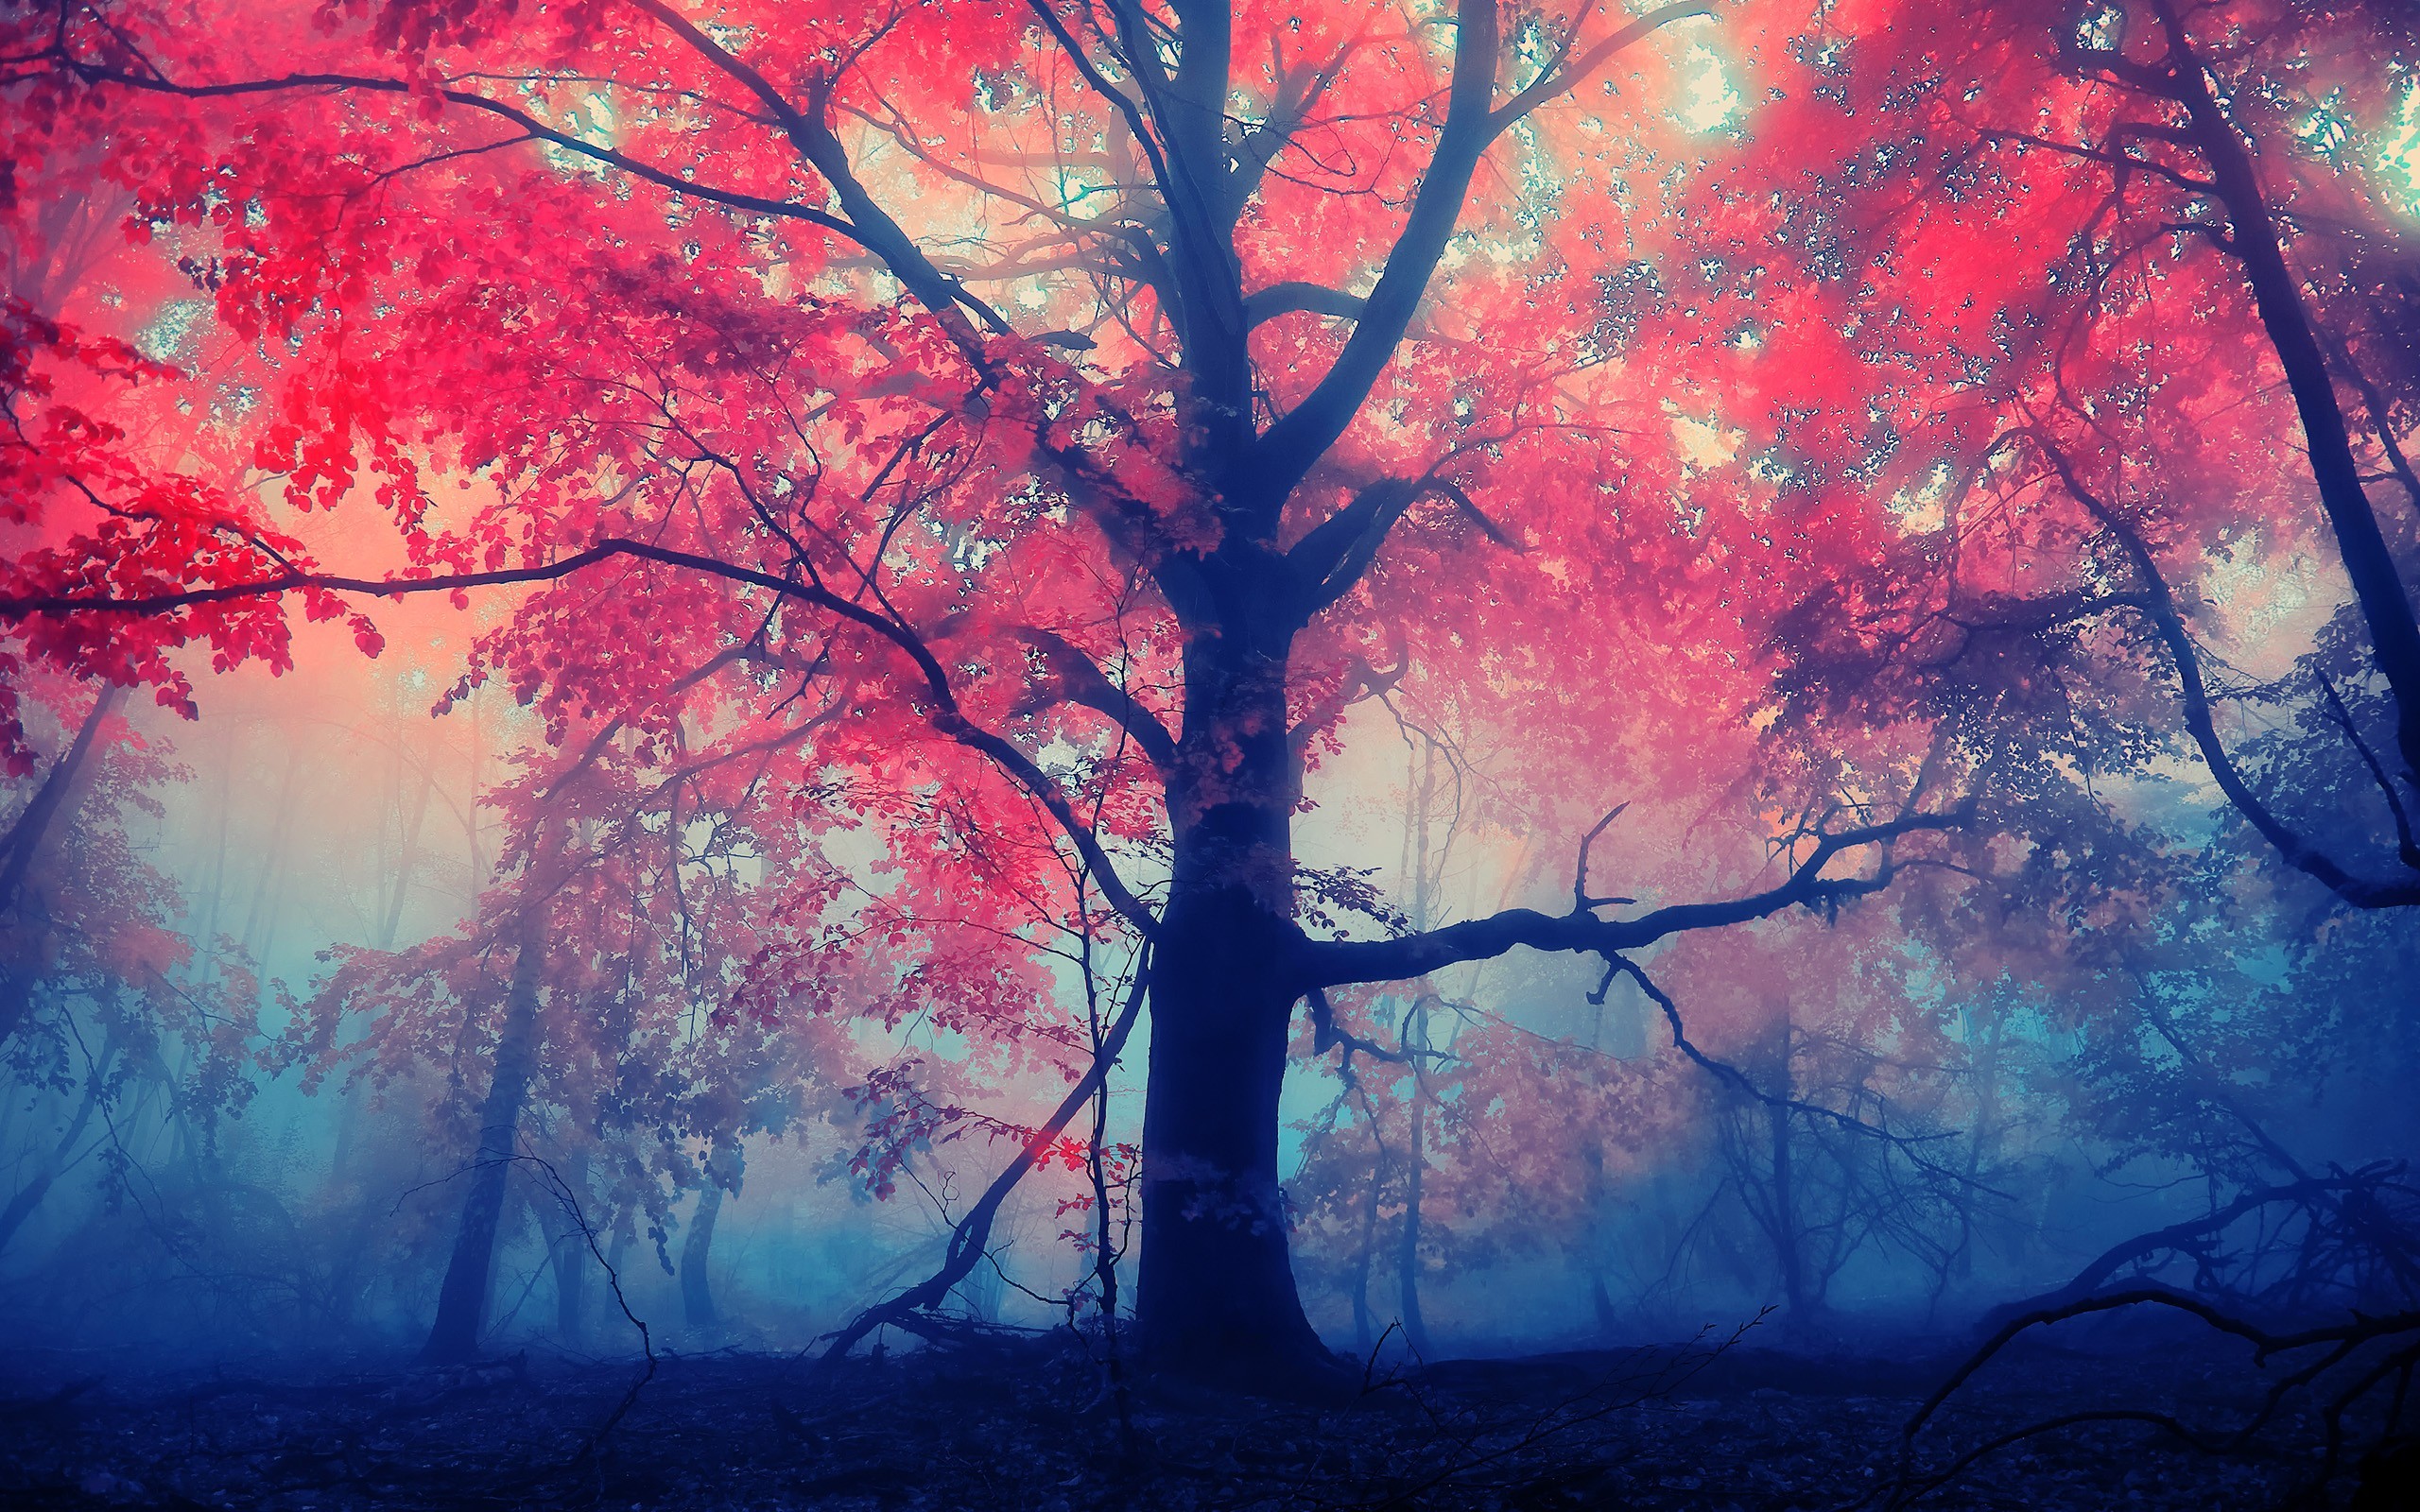 General 2560x1600 trees forest fall mist leaves nature